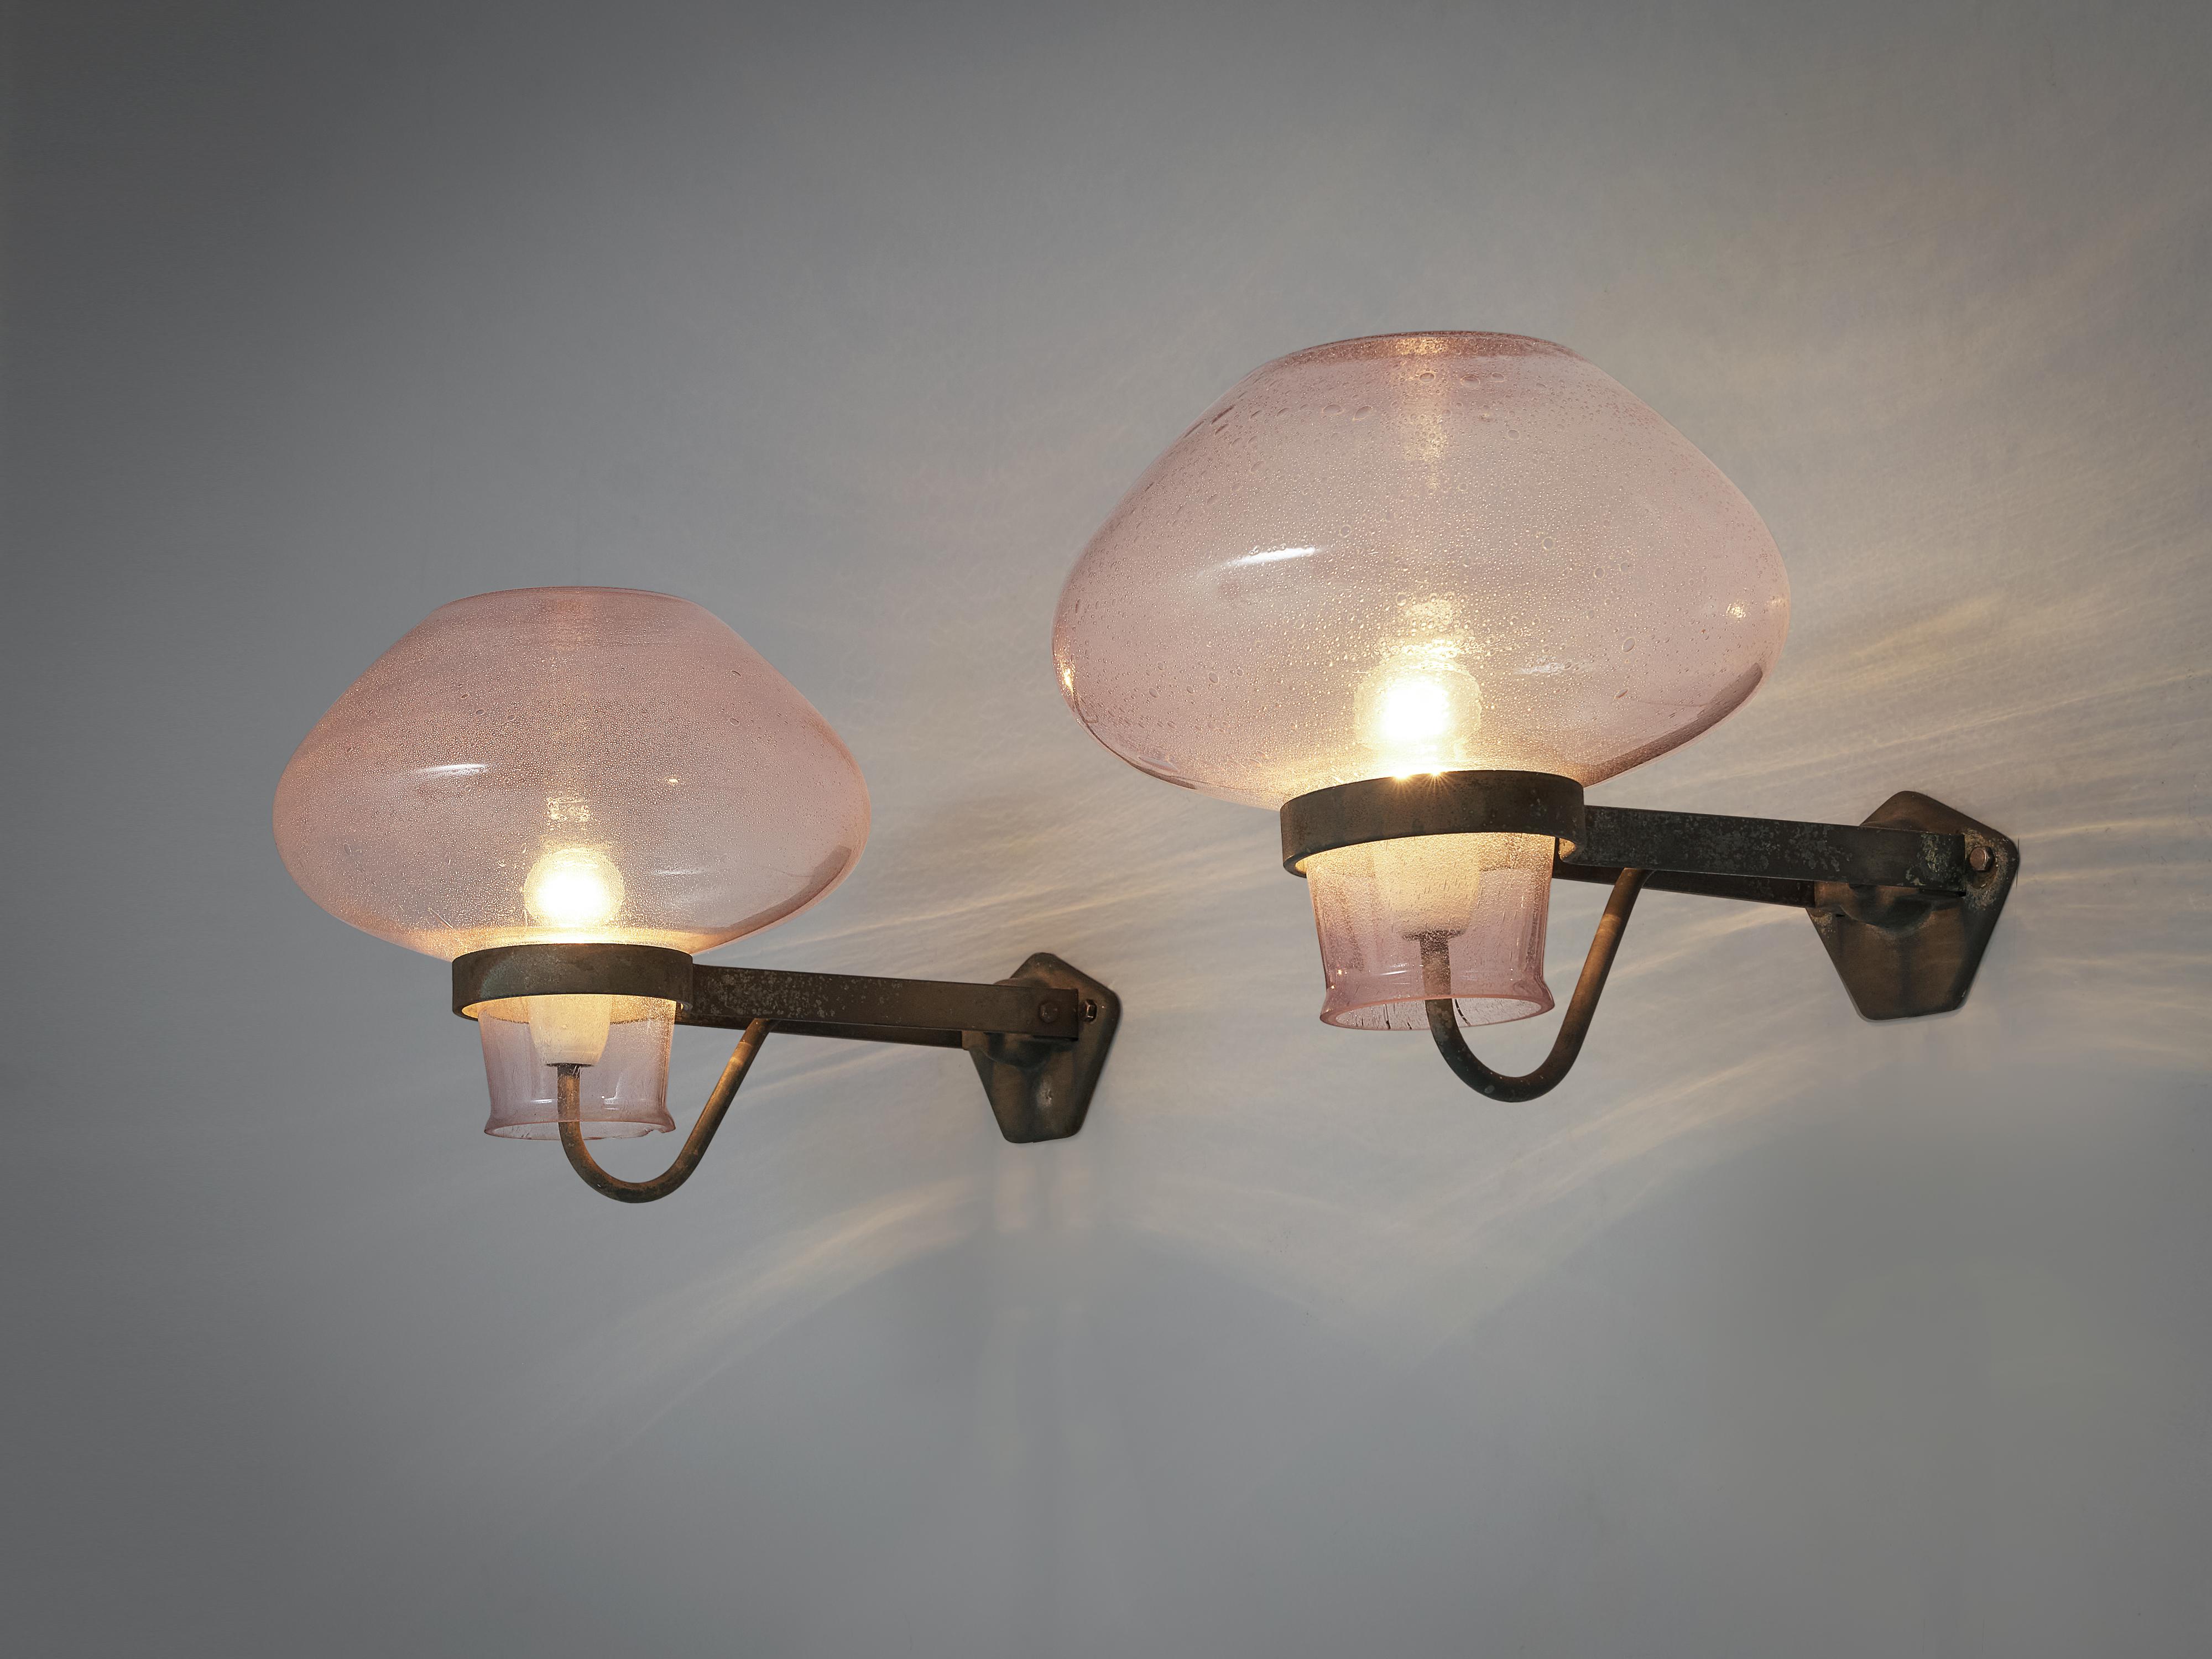 Gunnar Asplund for ASEA, pair of large wall lamps model 641, colored glass, metal, Sweden, 1930s

Swedish architect Gunnar Asplund (1885-1940) designed the originally for outdoor use intended lamps model 641 in the 1930s. With a diameter of 54cm